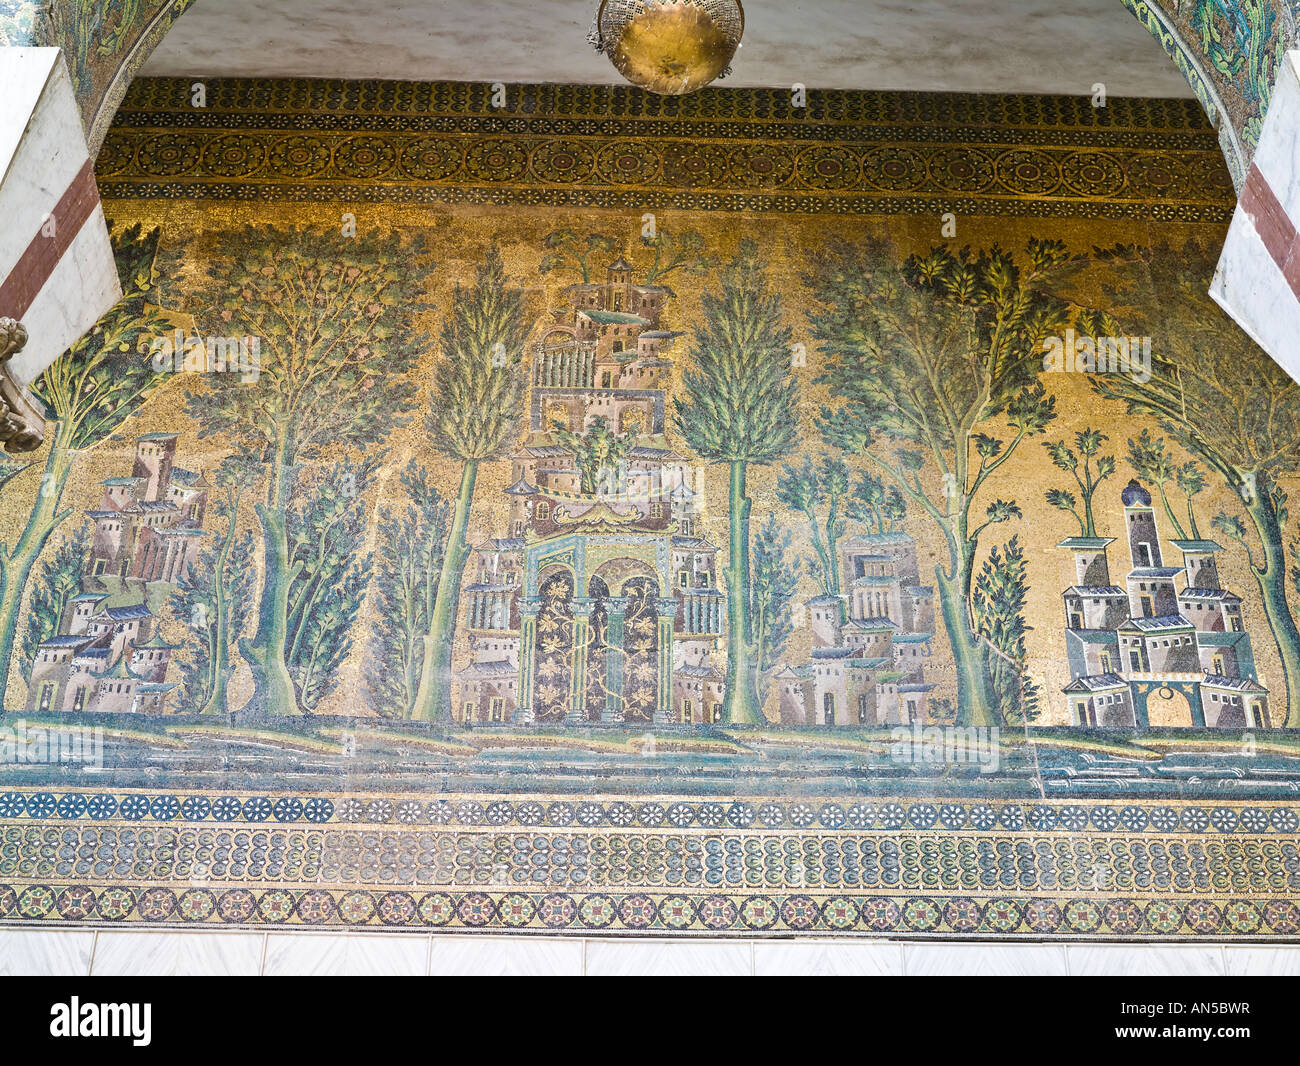 detail of mosaics, West portico, Great Mosque of Damascus Stock Photo